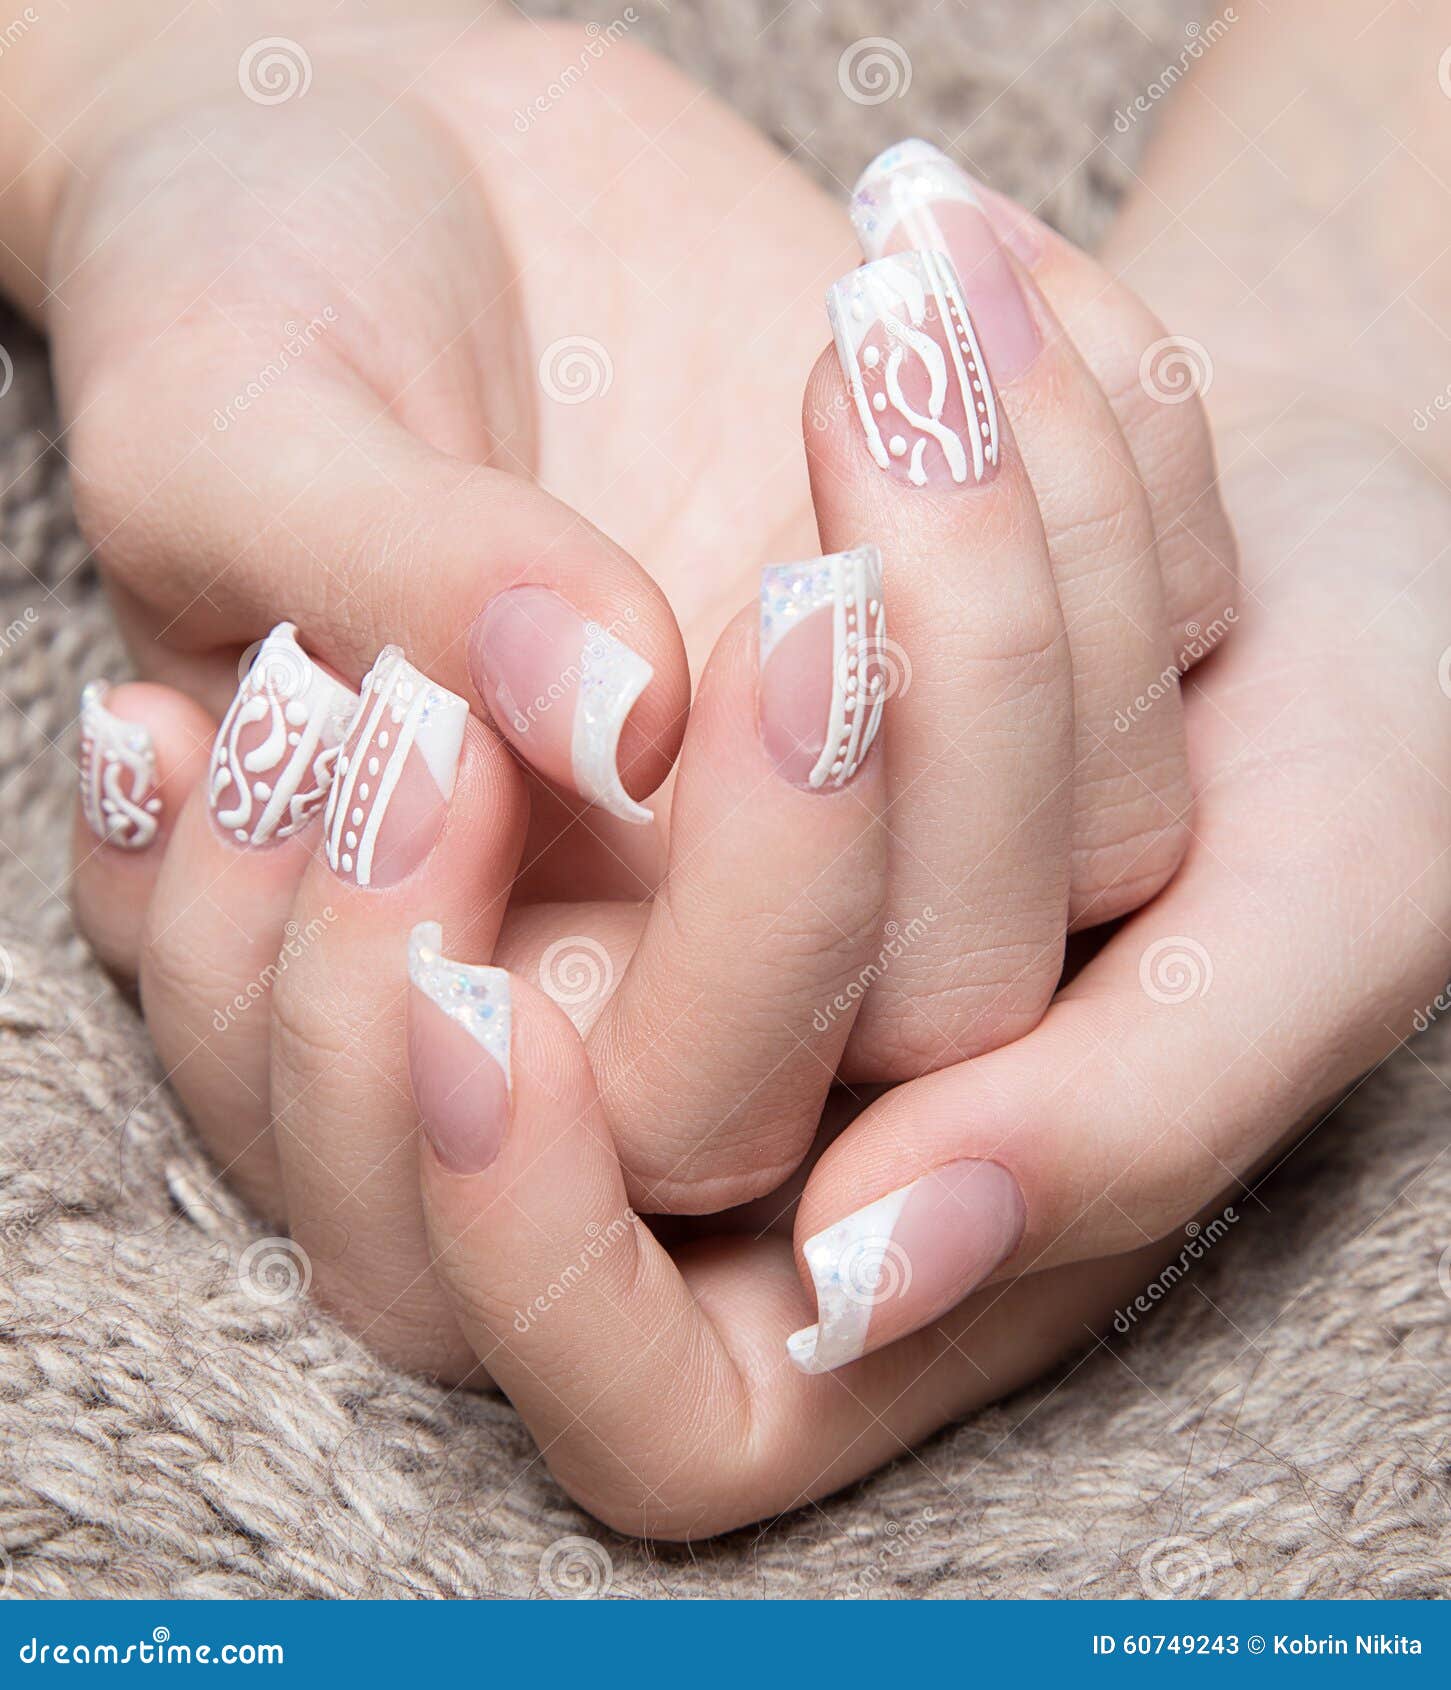 33 Ideas Of White Nails Designs To Embrace Your Beauty